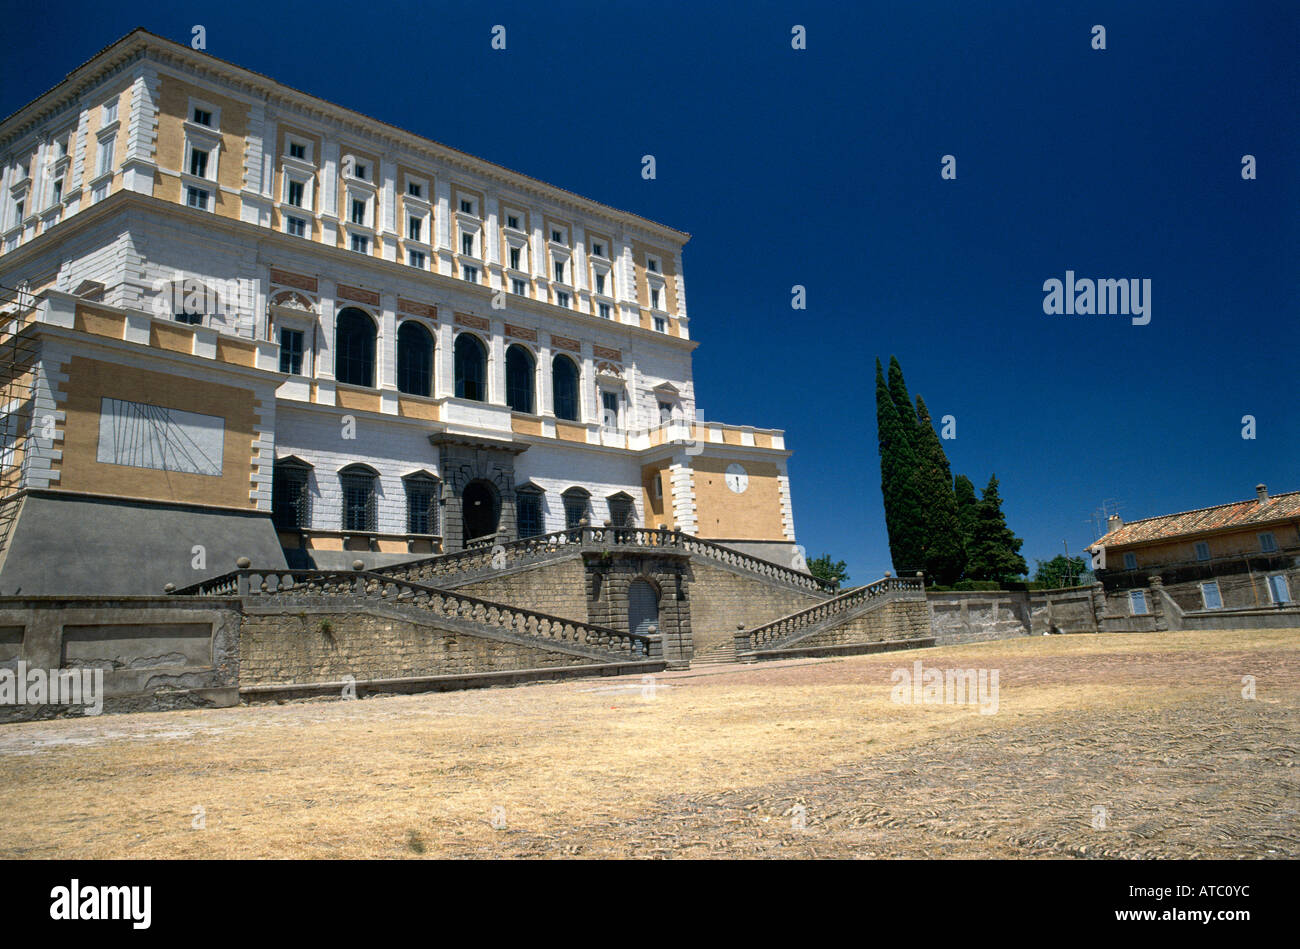 The exterior of the late Renaissance Palazzo Farnese designed in the Italian Mannerist style by Vignola and built in the 1520s by Sangallo the Younger in the village of Caprarola Stock Photo